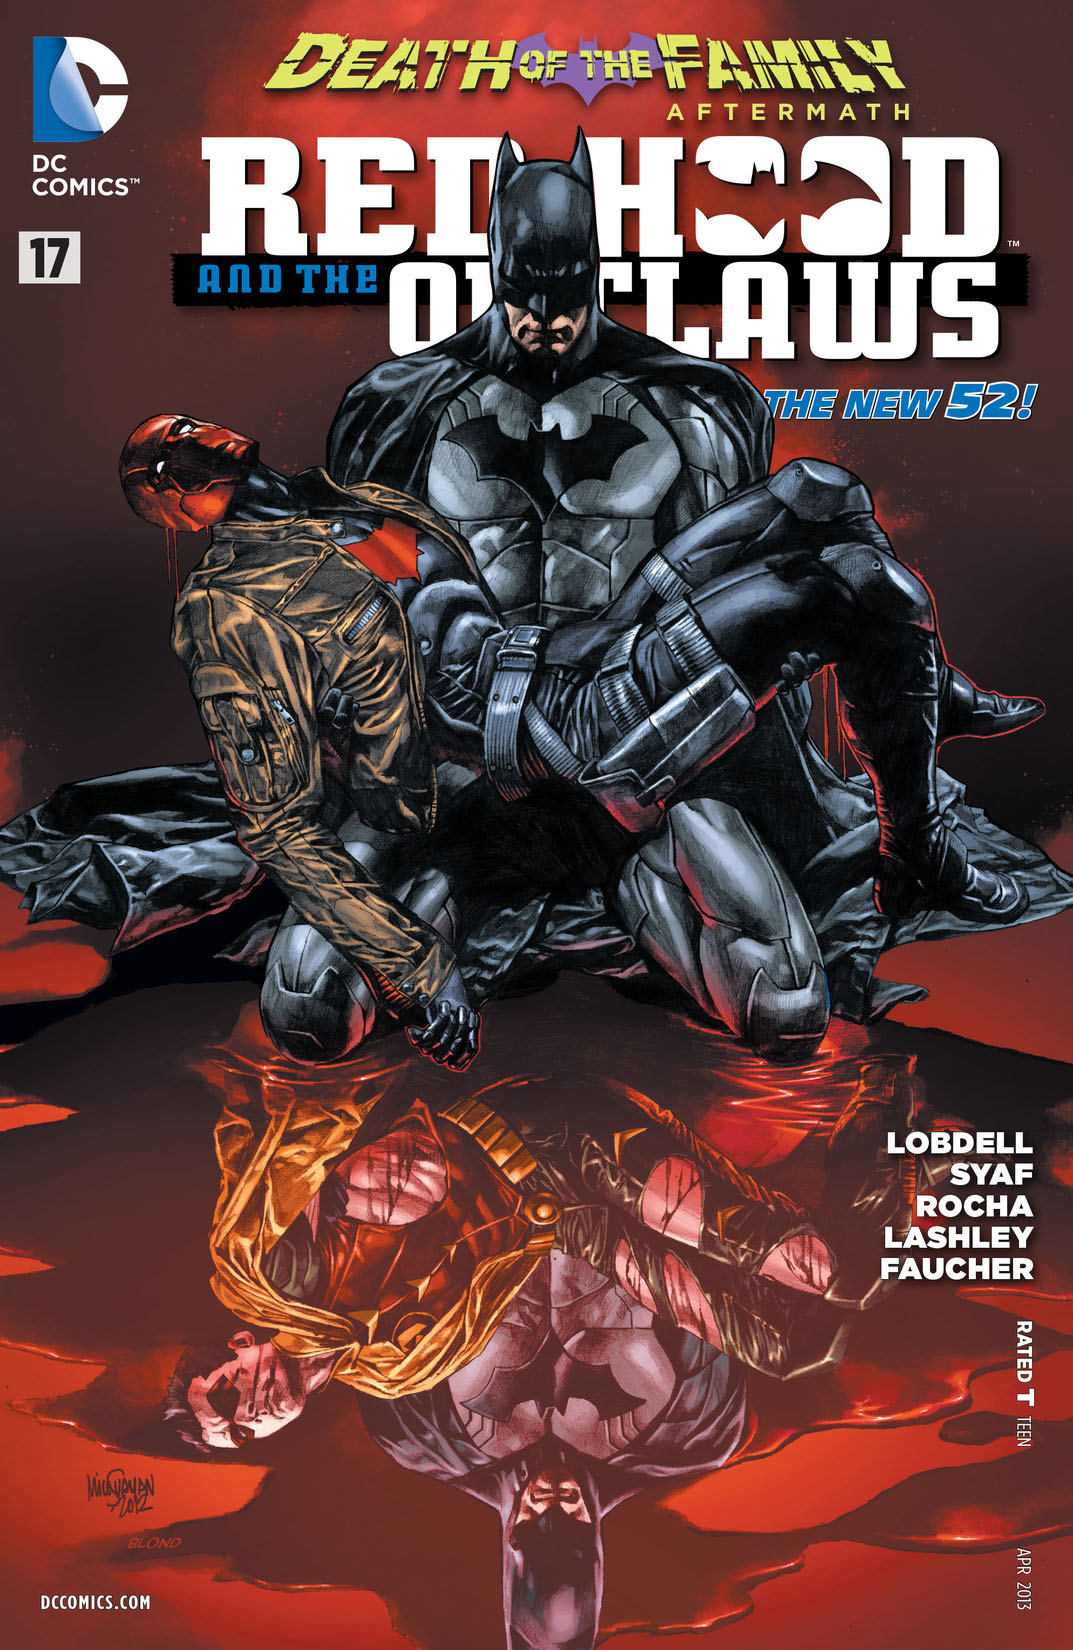 Red Hood and the Outlaws (2011-) #17 preview images